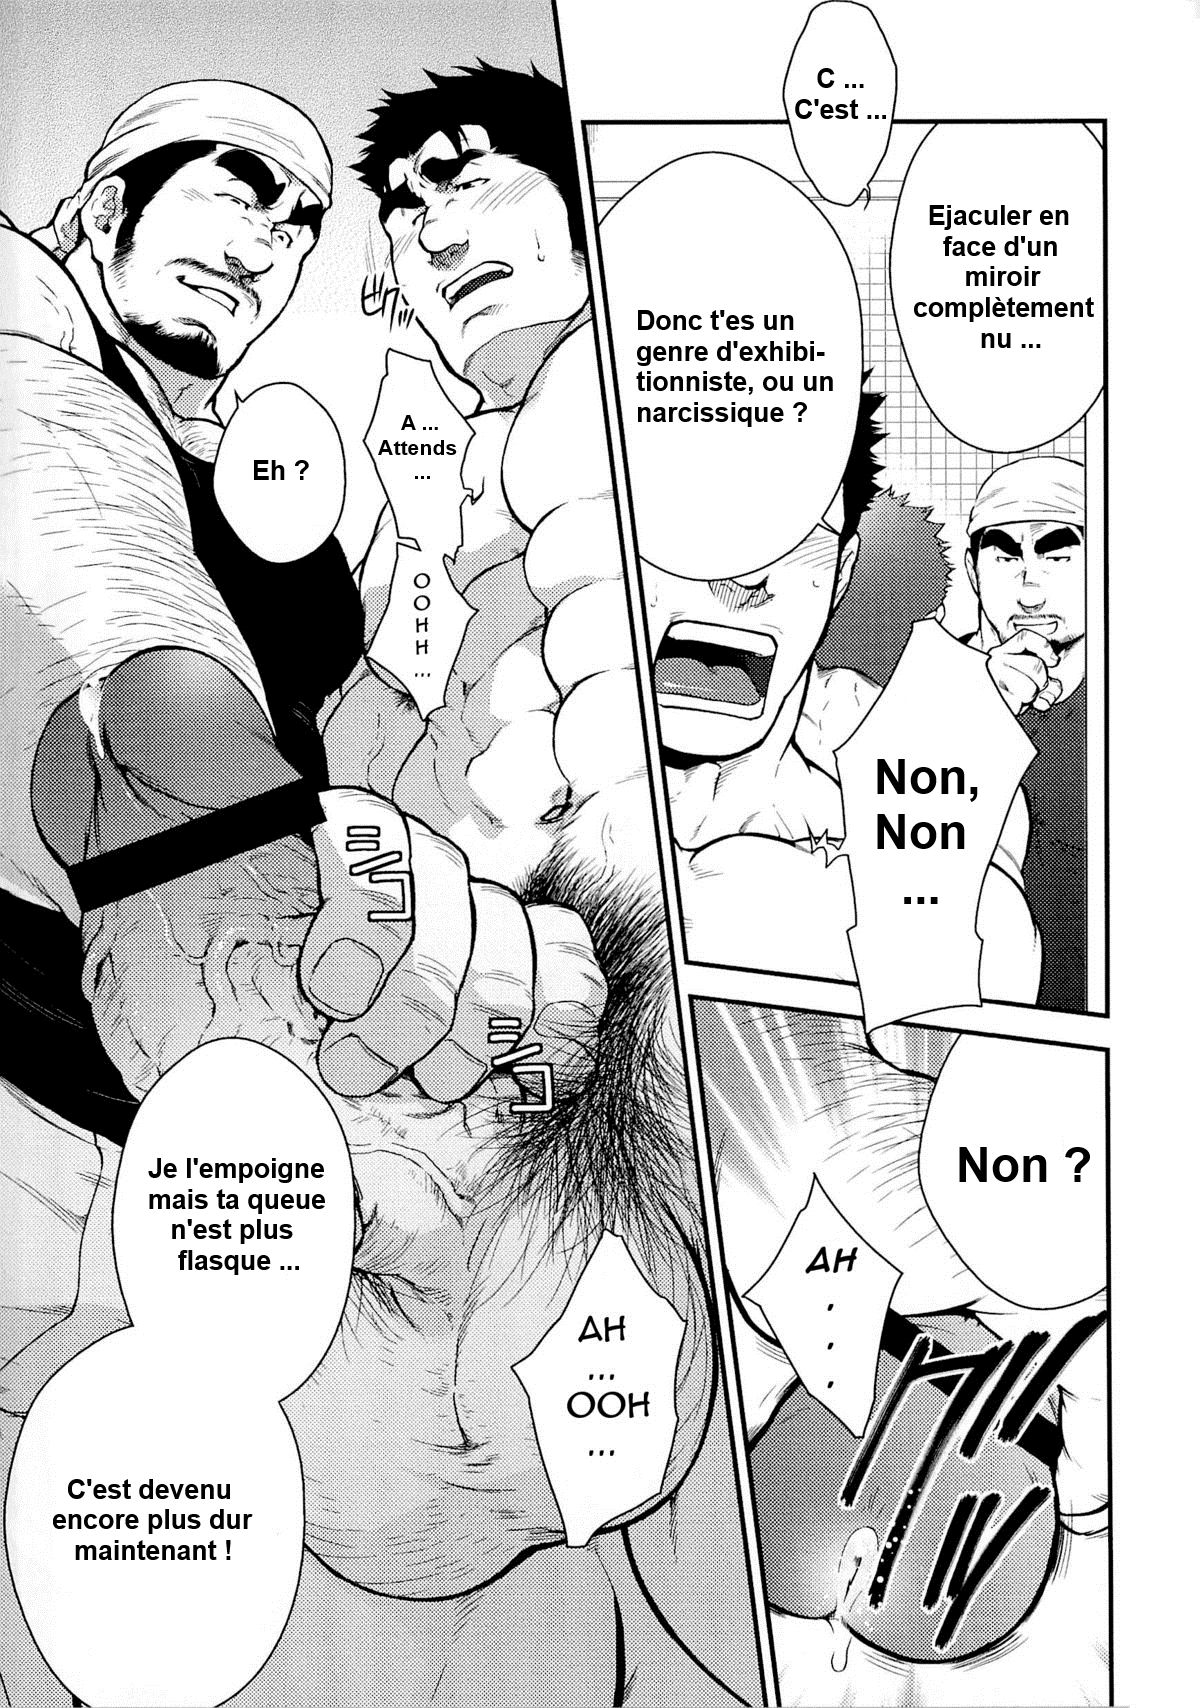 [Terujirou] After a Married Narcissistic Man Jerk Off in the Park [French] translation by MJV2 